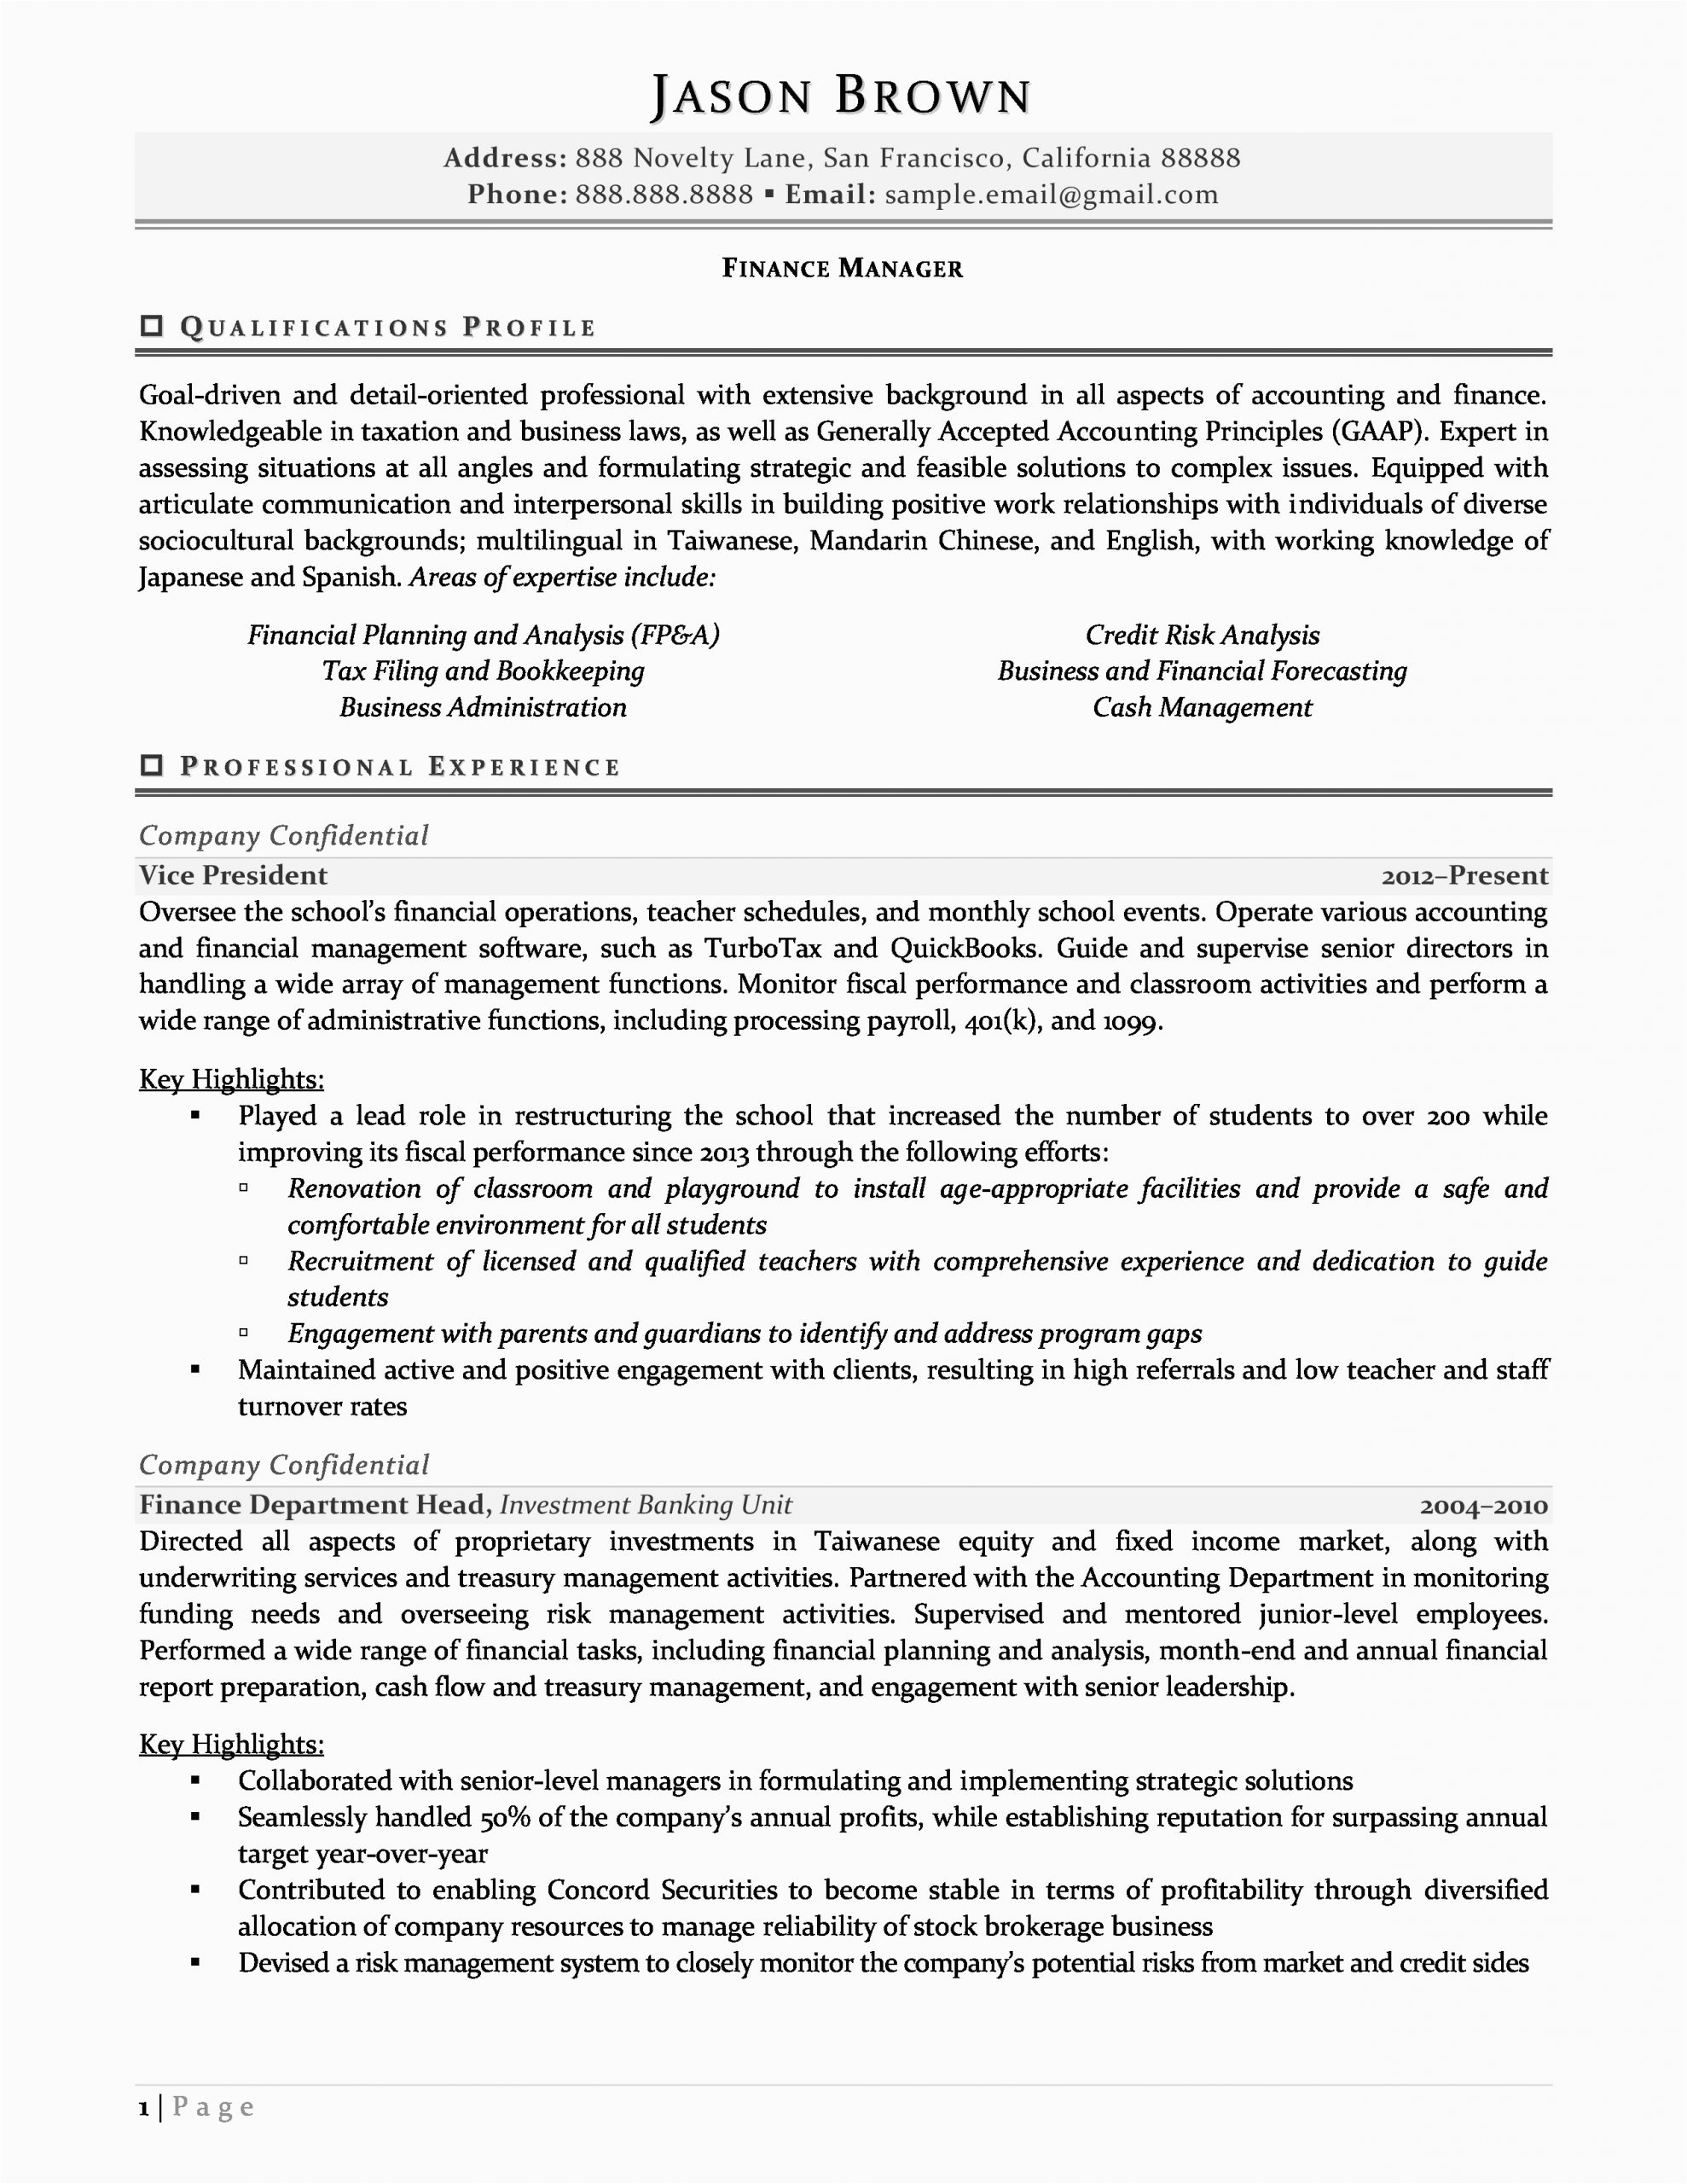 Sample Resume for Financial Management Position Finance Manager Resume Examples